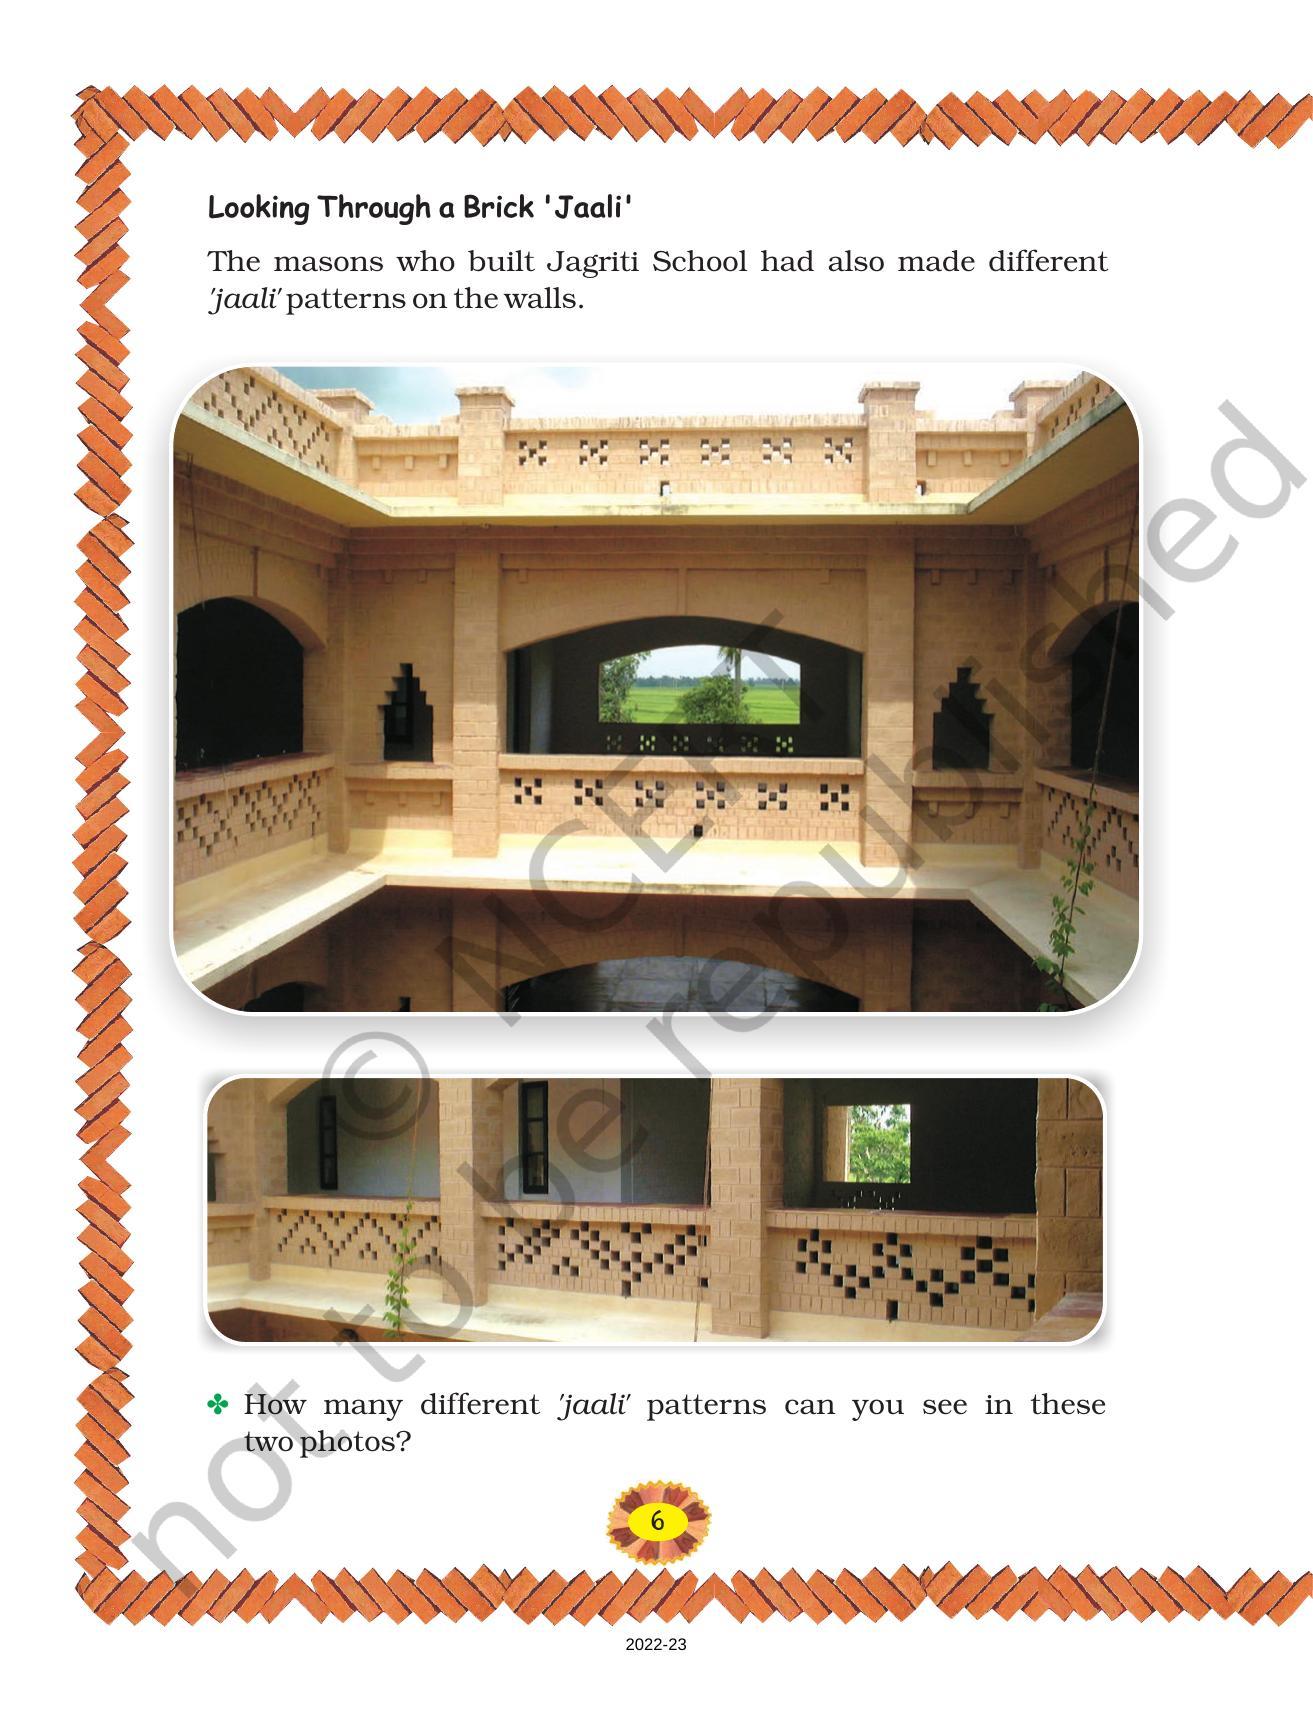 NCERT Book for Class 4 Maths Chapter 1 Building with Bricks - Page 6